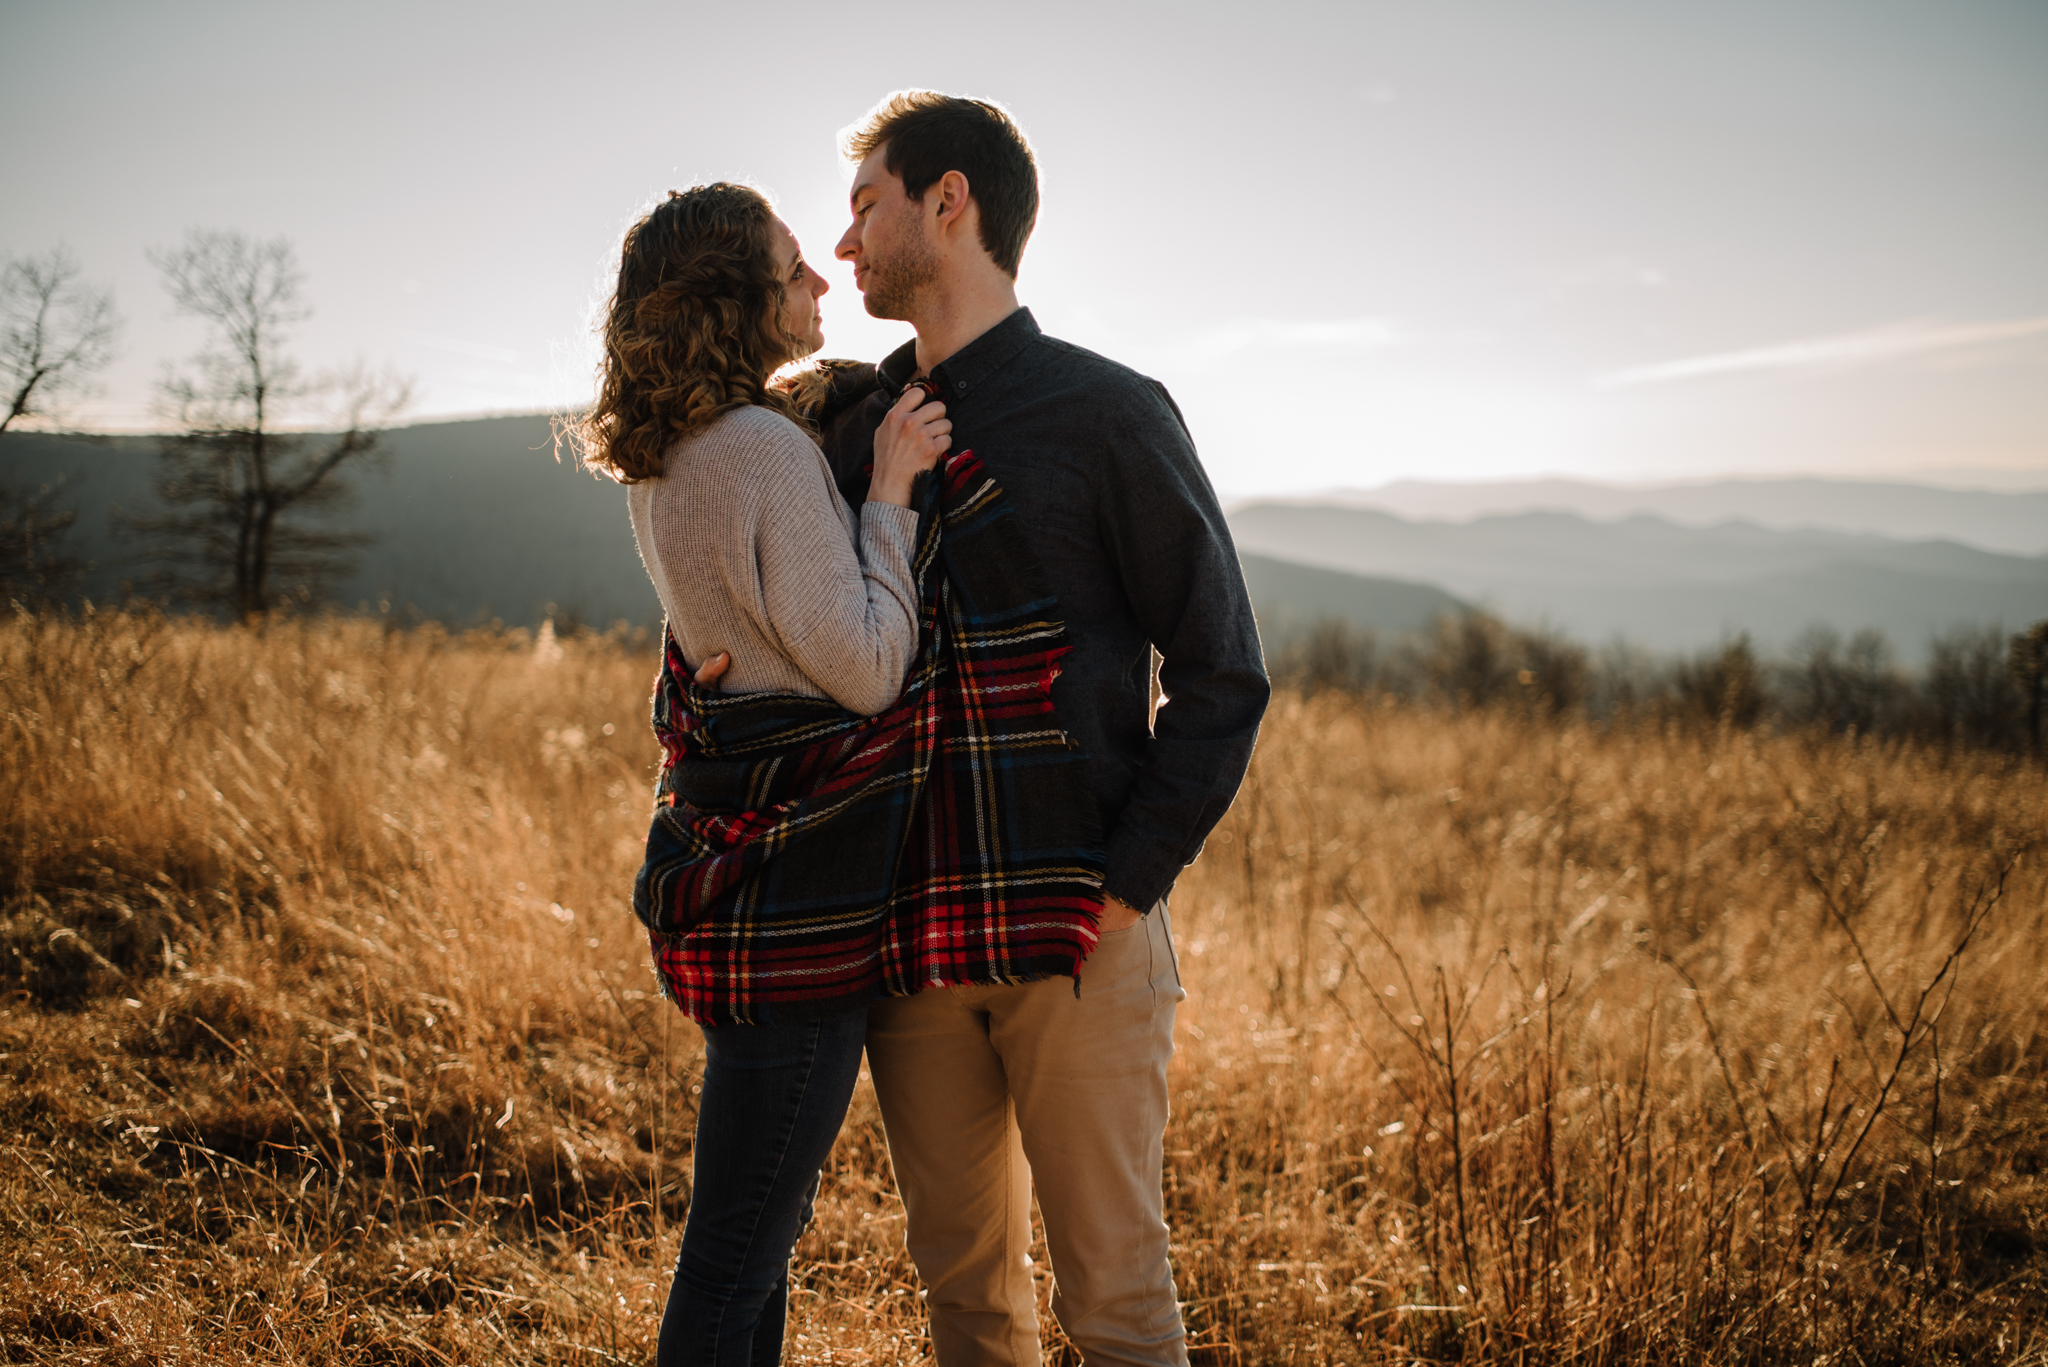 Alli and Mitchell - Shenandoah National Park Adventure Winter Engagement Session on Skyline Drive - White Sails Creative Elopement Photography_42.JPG